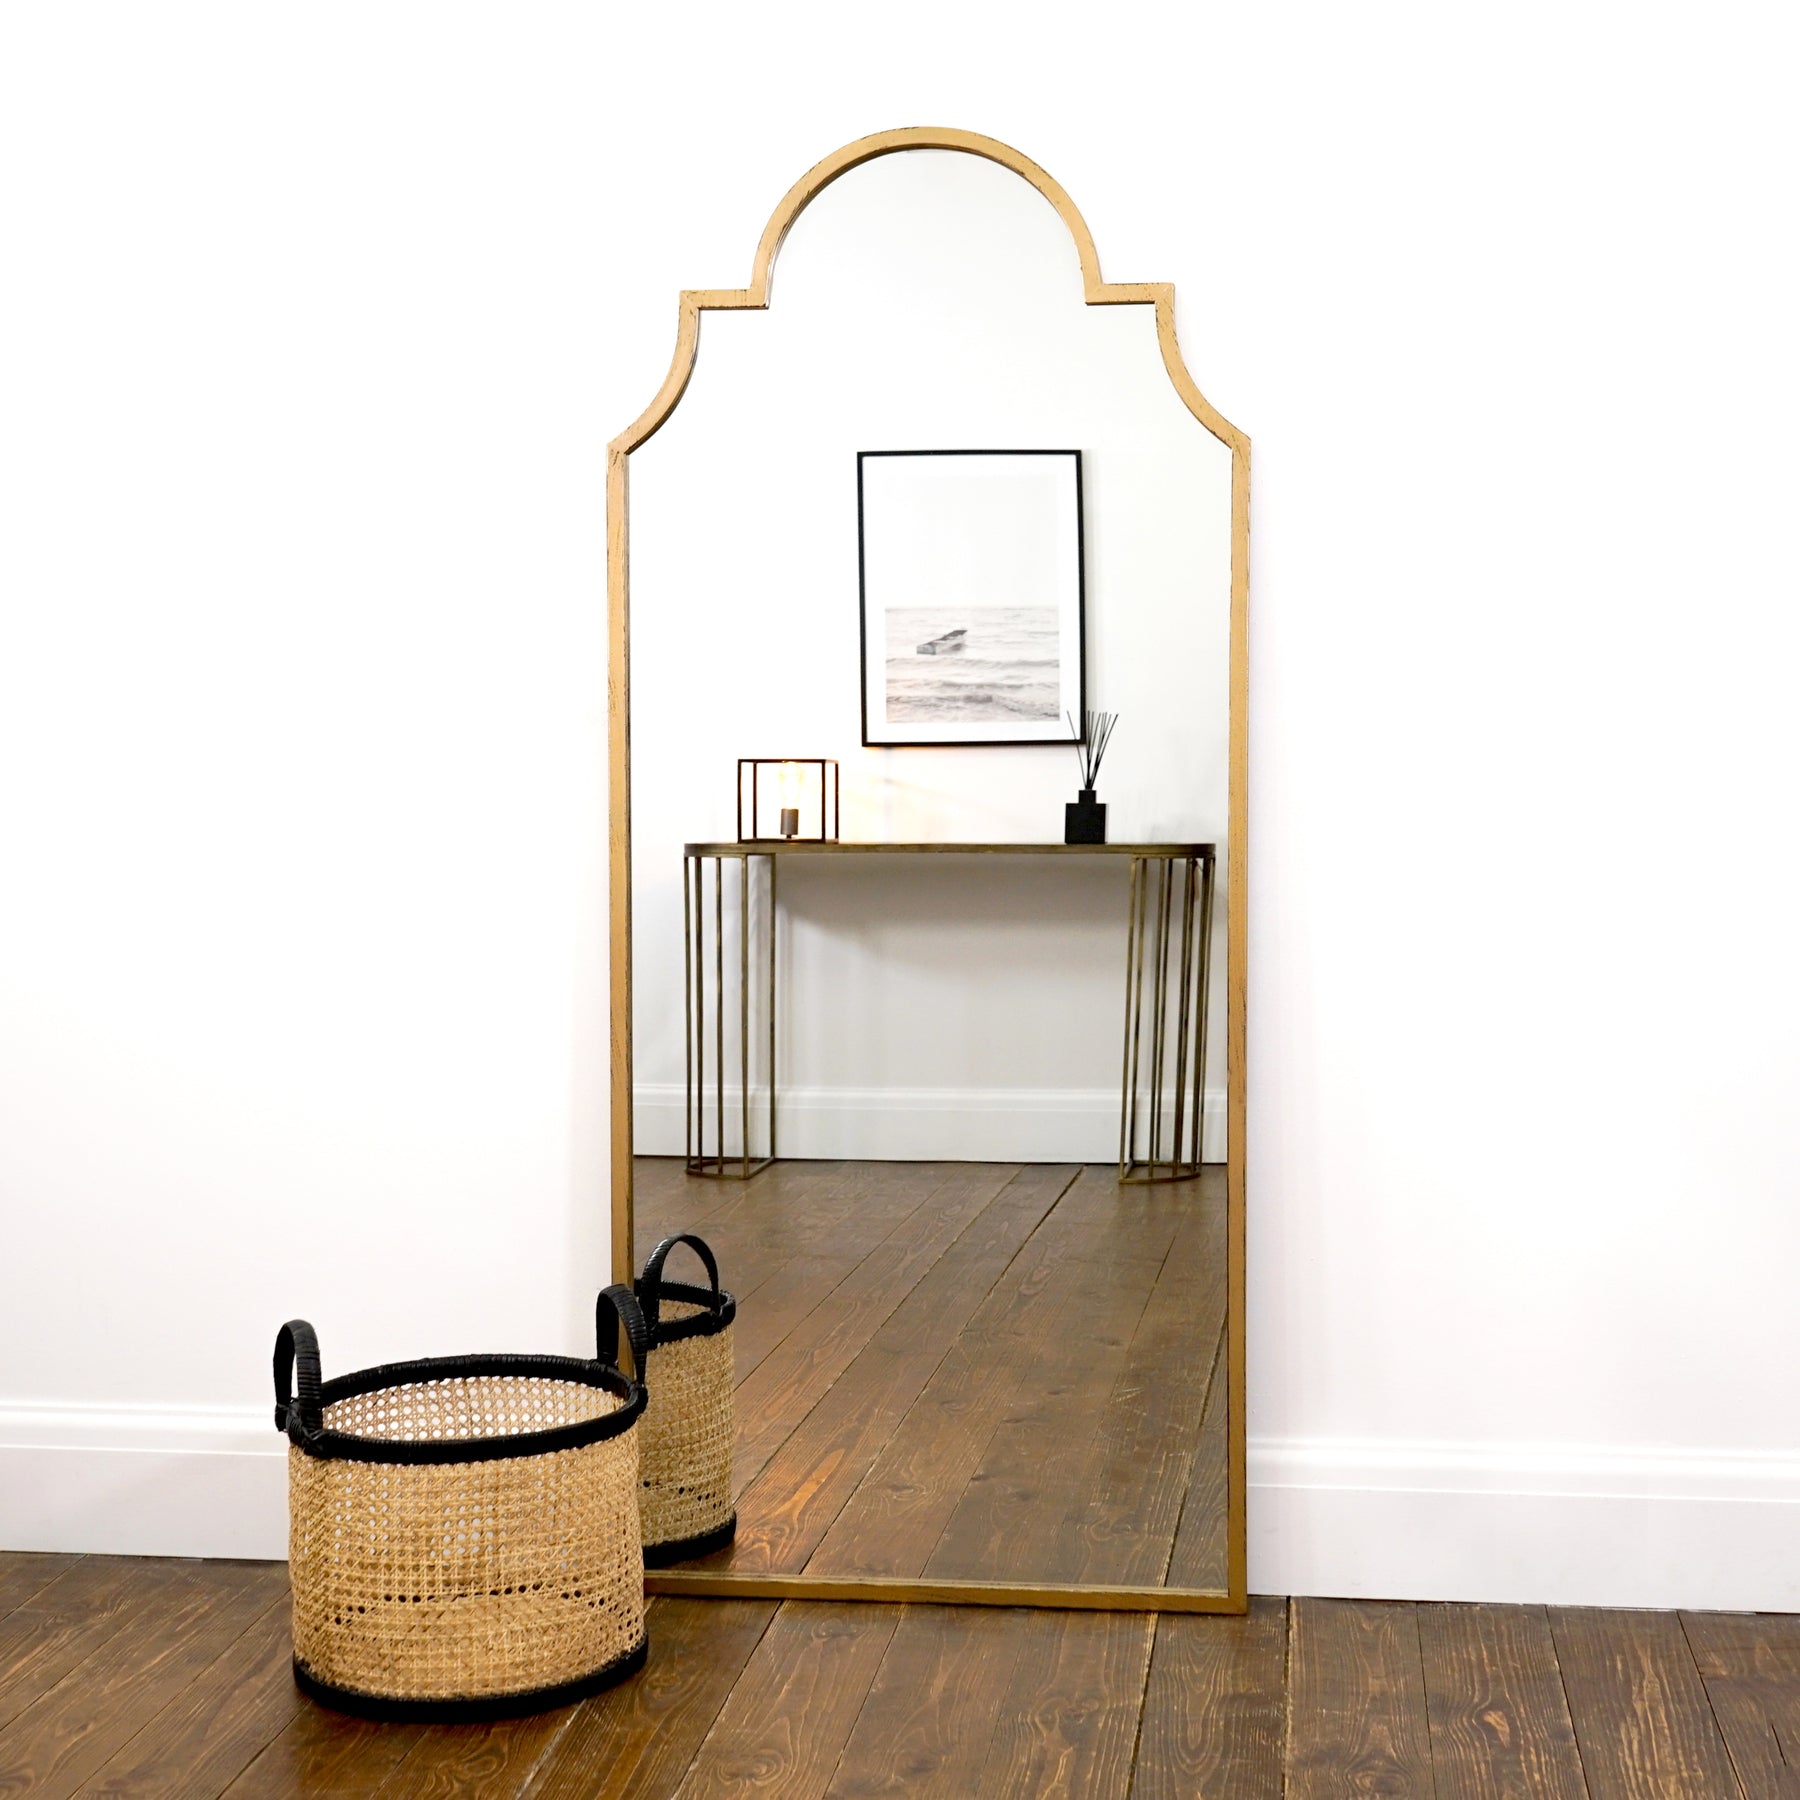 Alexandria - Gold Industrial Arched Metal Full Length Mirror 159cm x 70cm